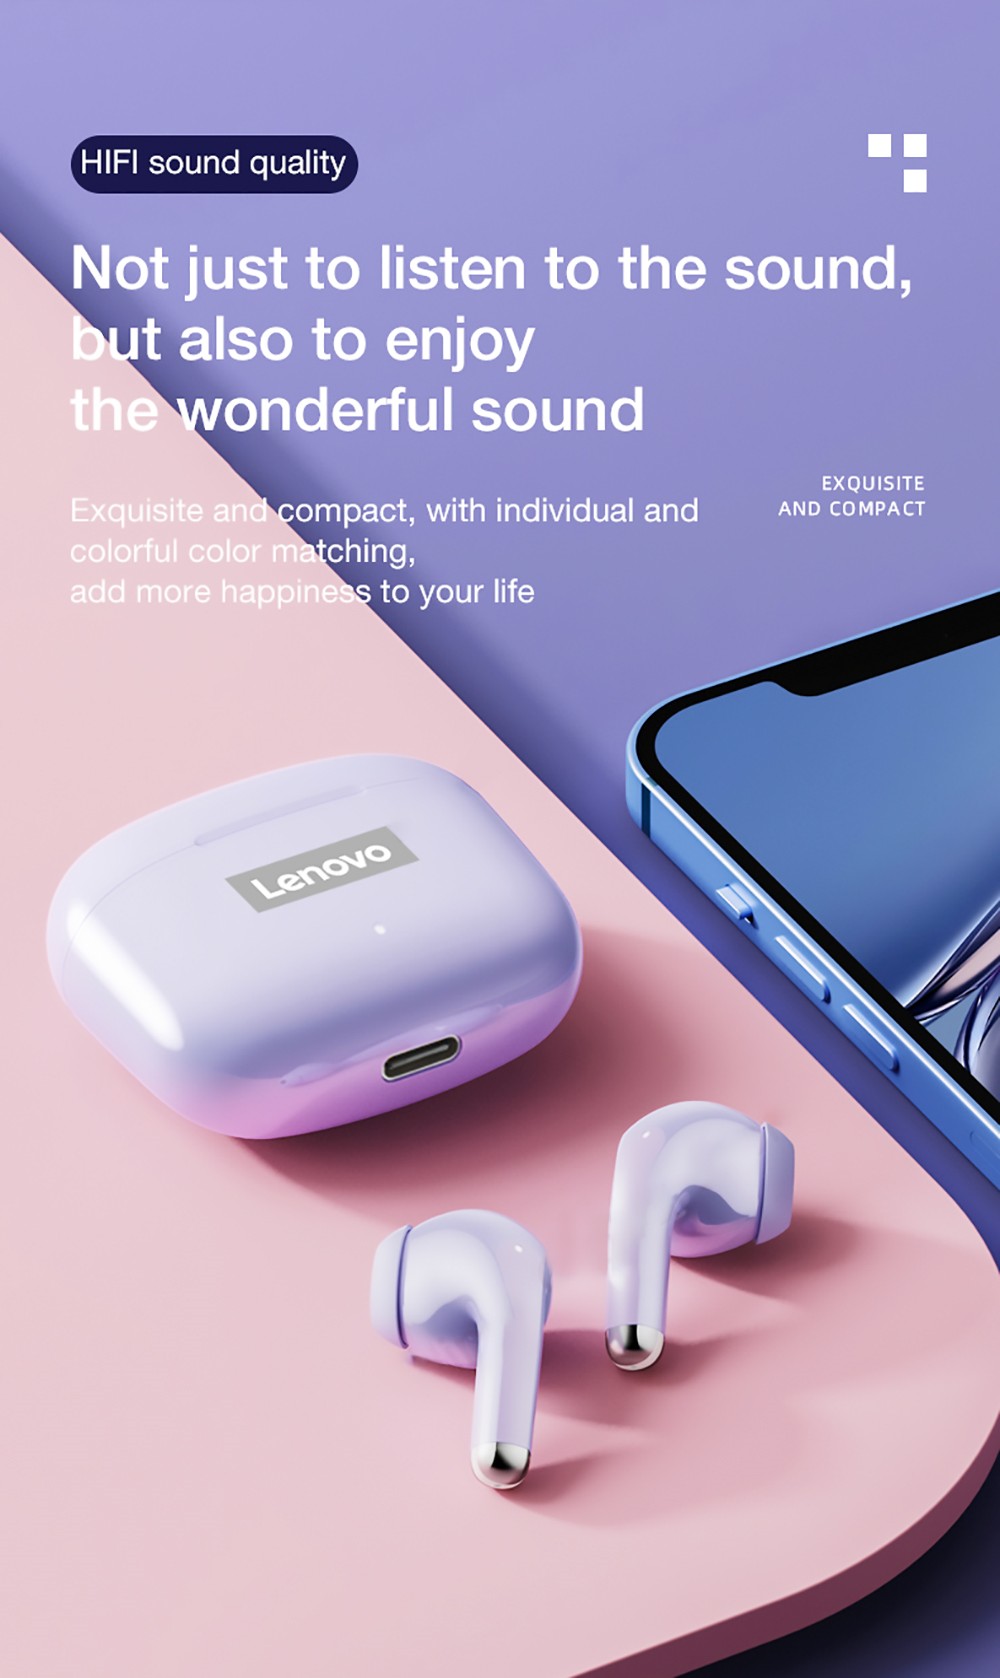 Lenovo Thinkplus LivePods LP40 Pro TWS Wireless Bluetooth Earphone Noise Cancelling Earbuds Gaming Sports Headset - Purple